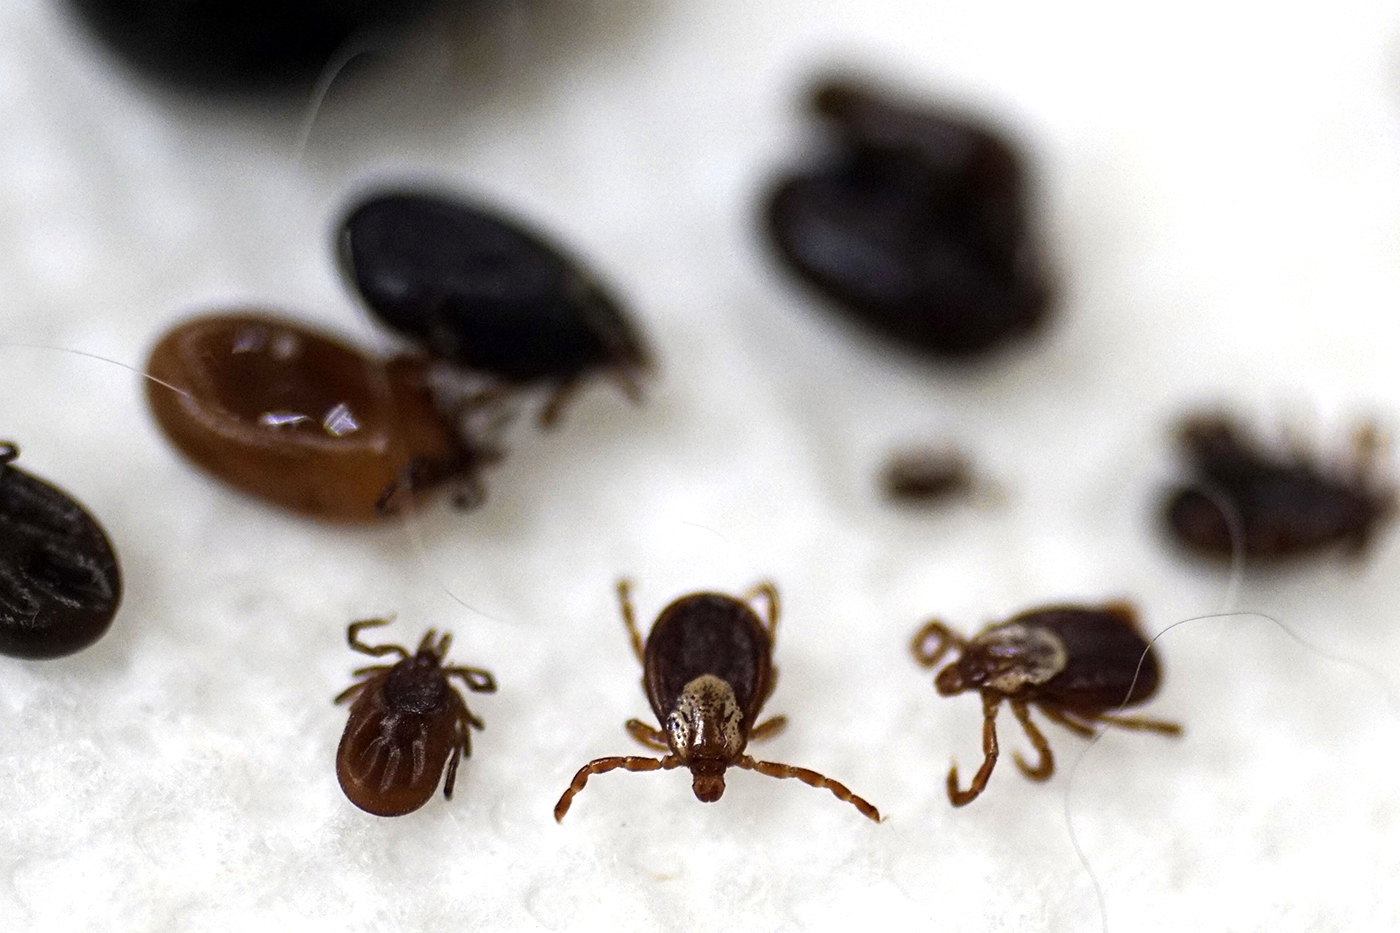 Here's everything you need to know about Lyme disease